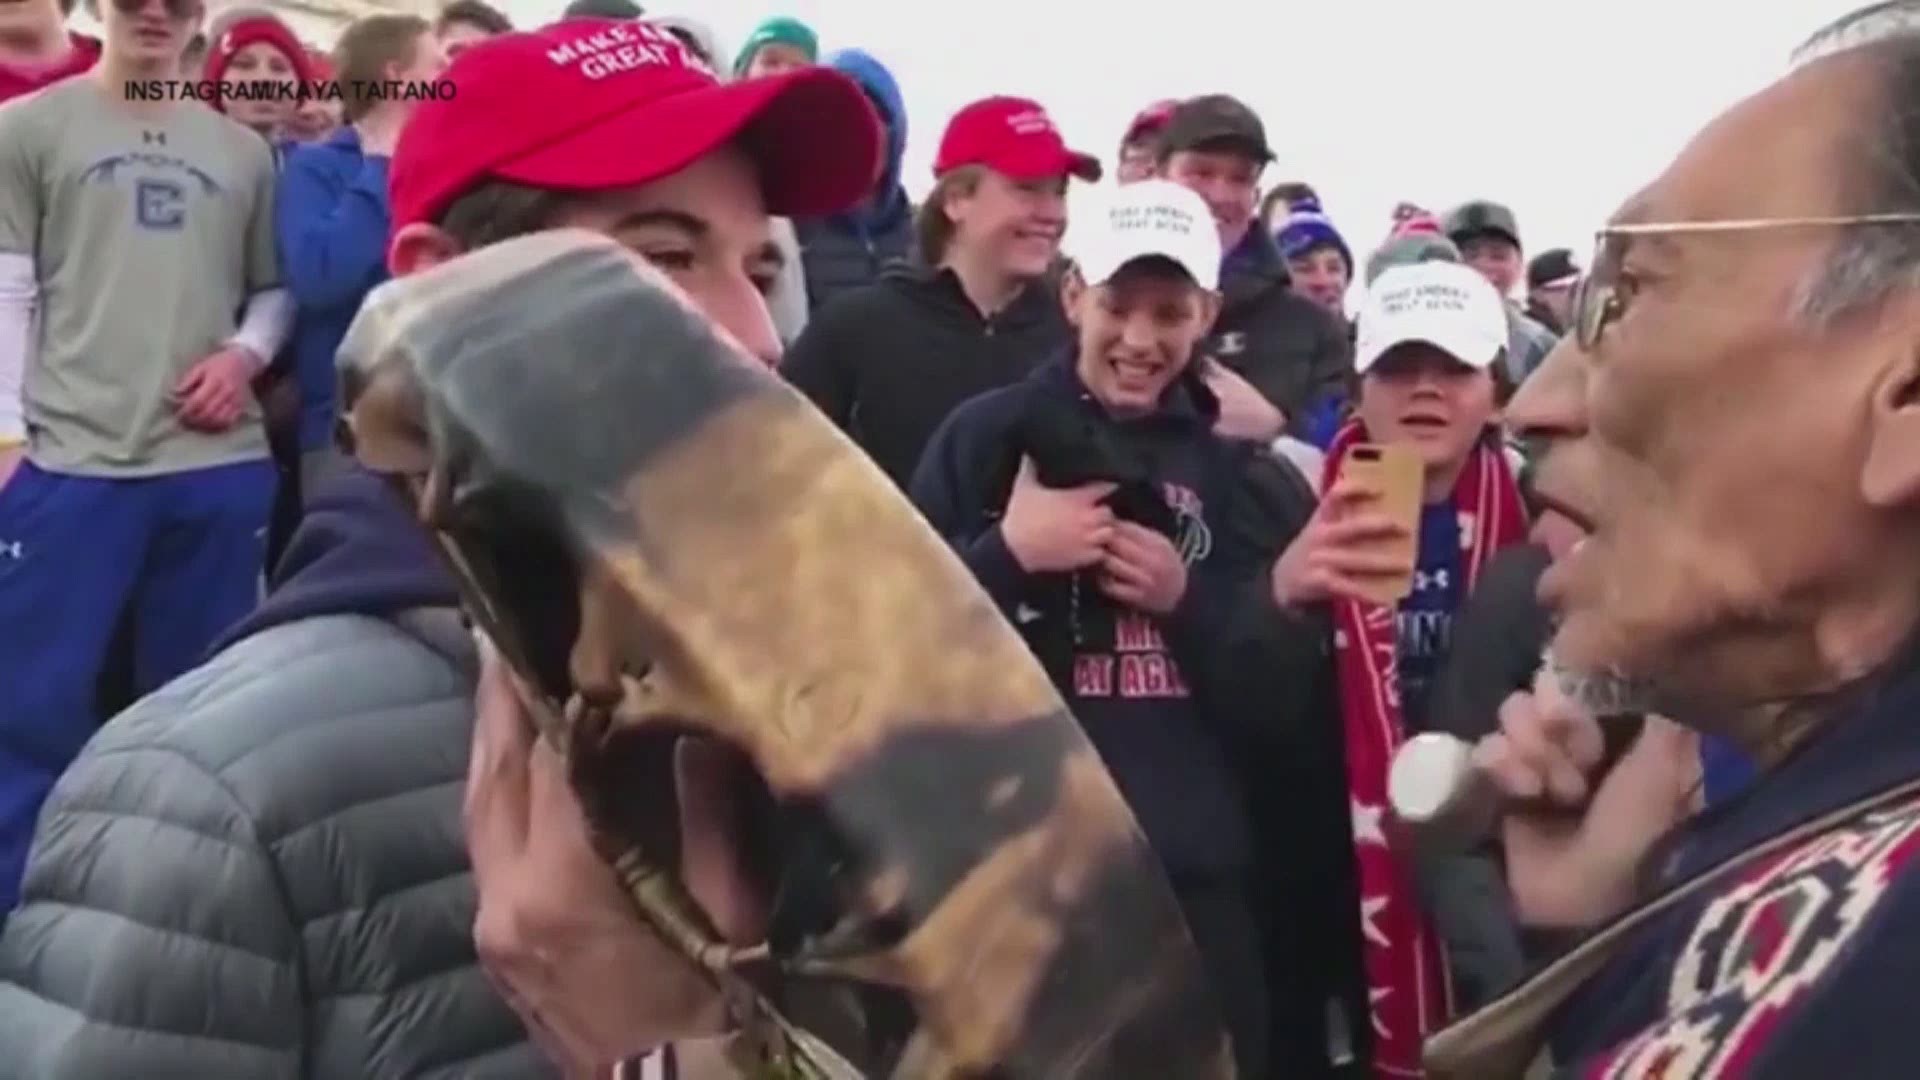 A group of white teenagers, many wearing 'Make America Great Again' hats, was seen in a viral video with a Native American Vietnam veteran singing during the first Indigenous People's March in Washington on Friday. But as CBS News' Marc Liverman explains, both key figures from the video are now talking...indicating there might be more to the story than what was seen on camera.